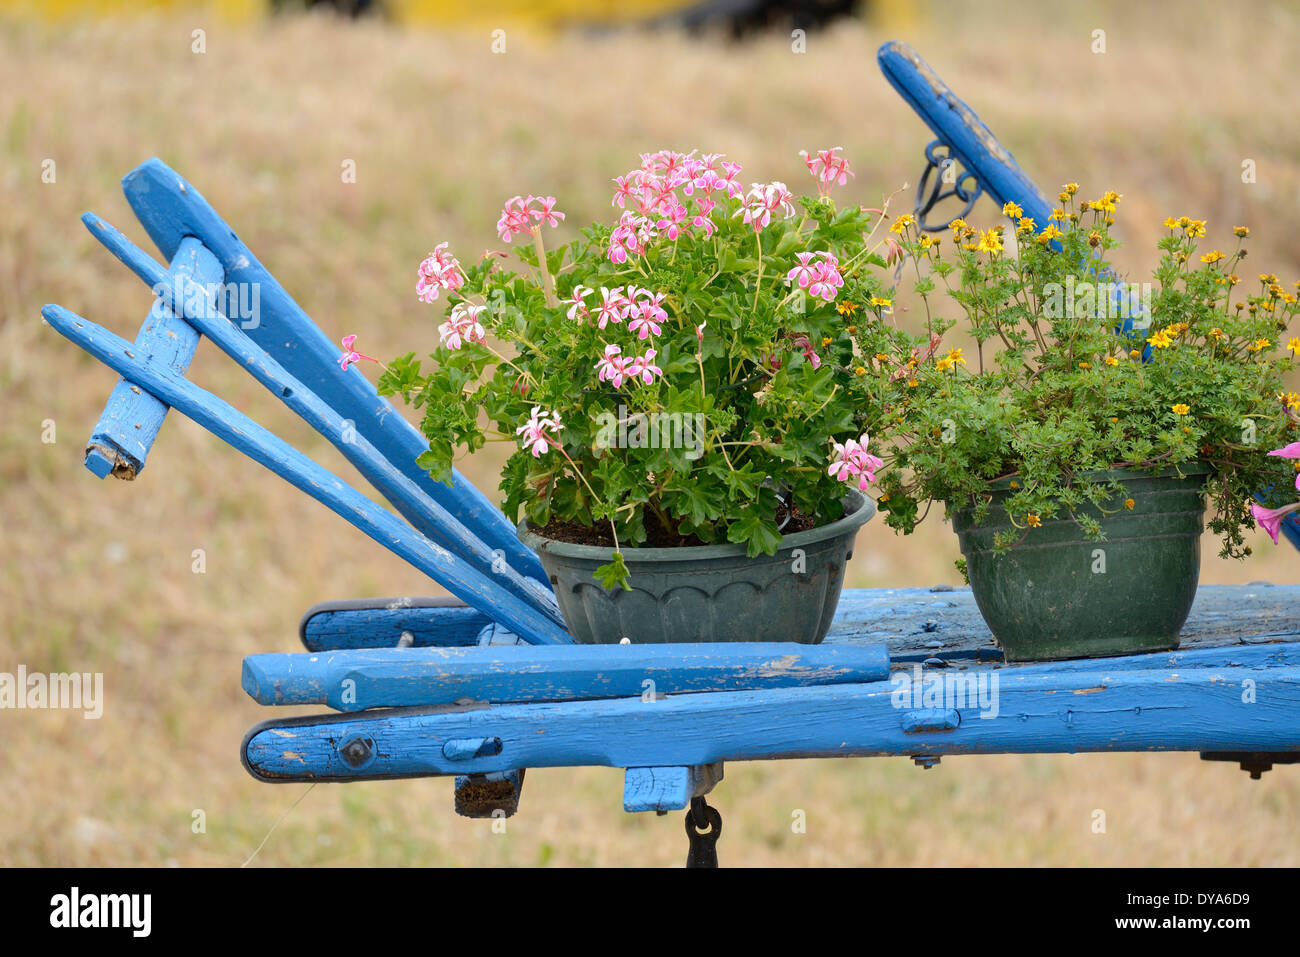 Europe, France, Provence, Vaucluse, wagon, flowers, still life, detail Stock Photo